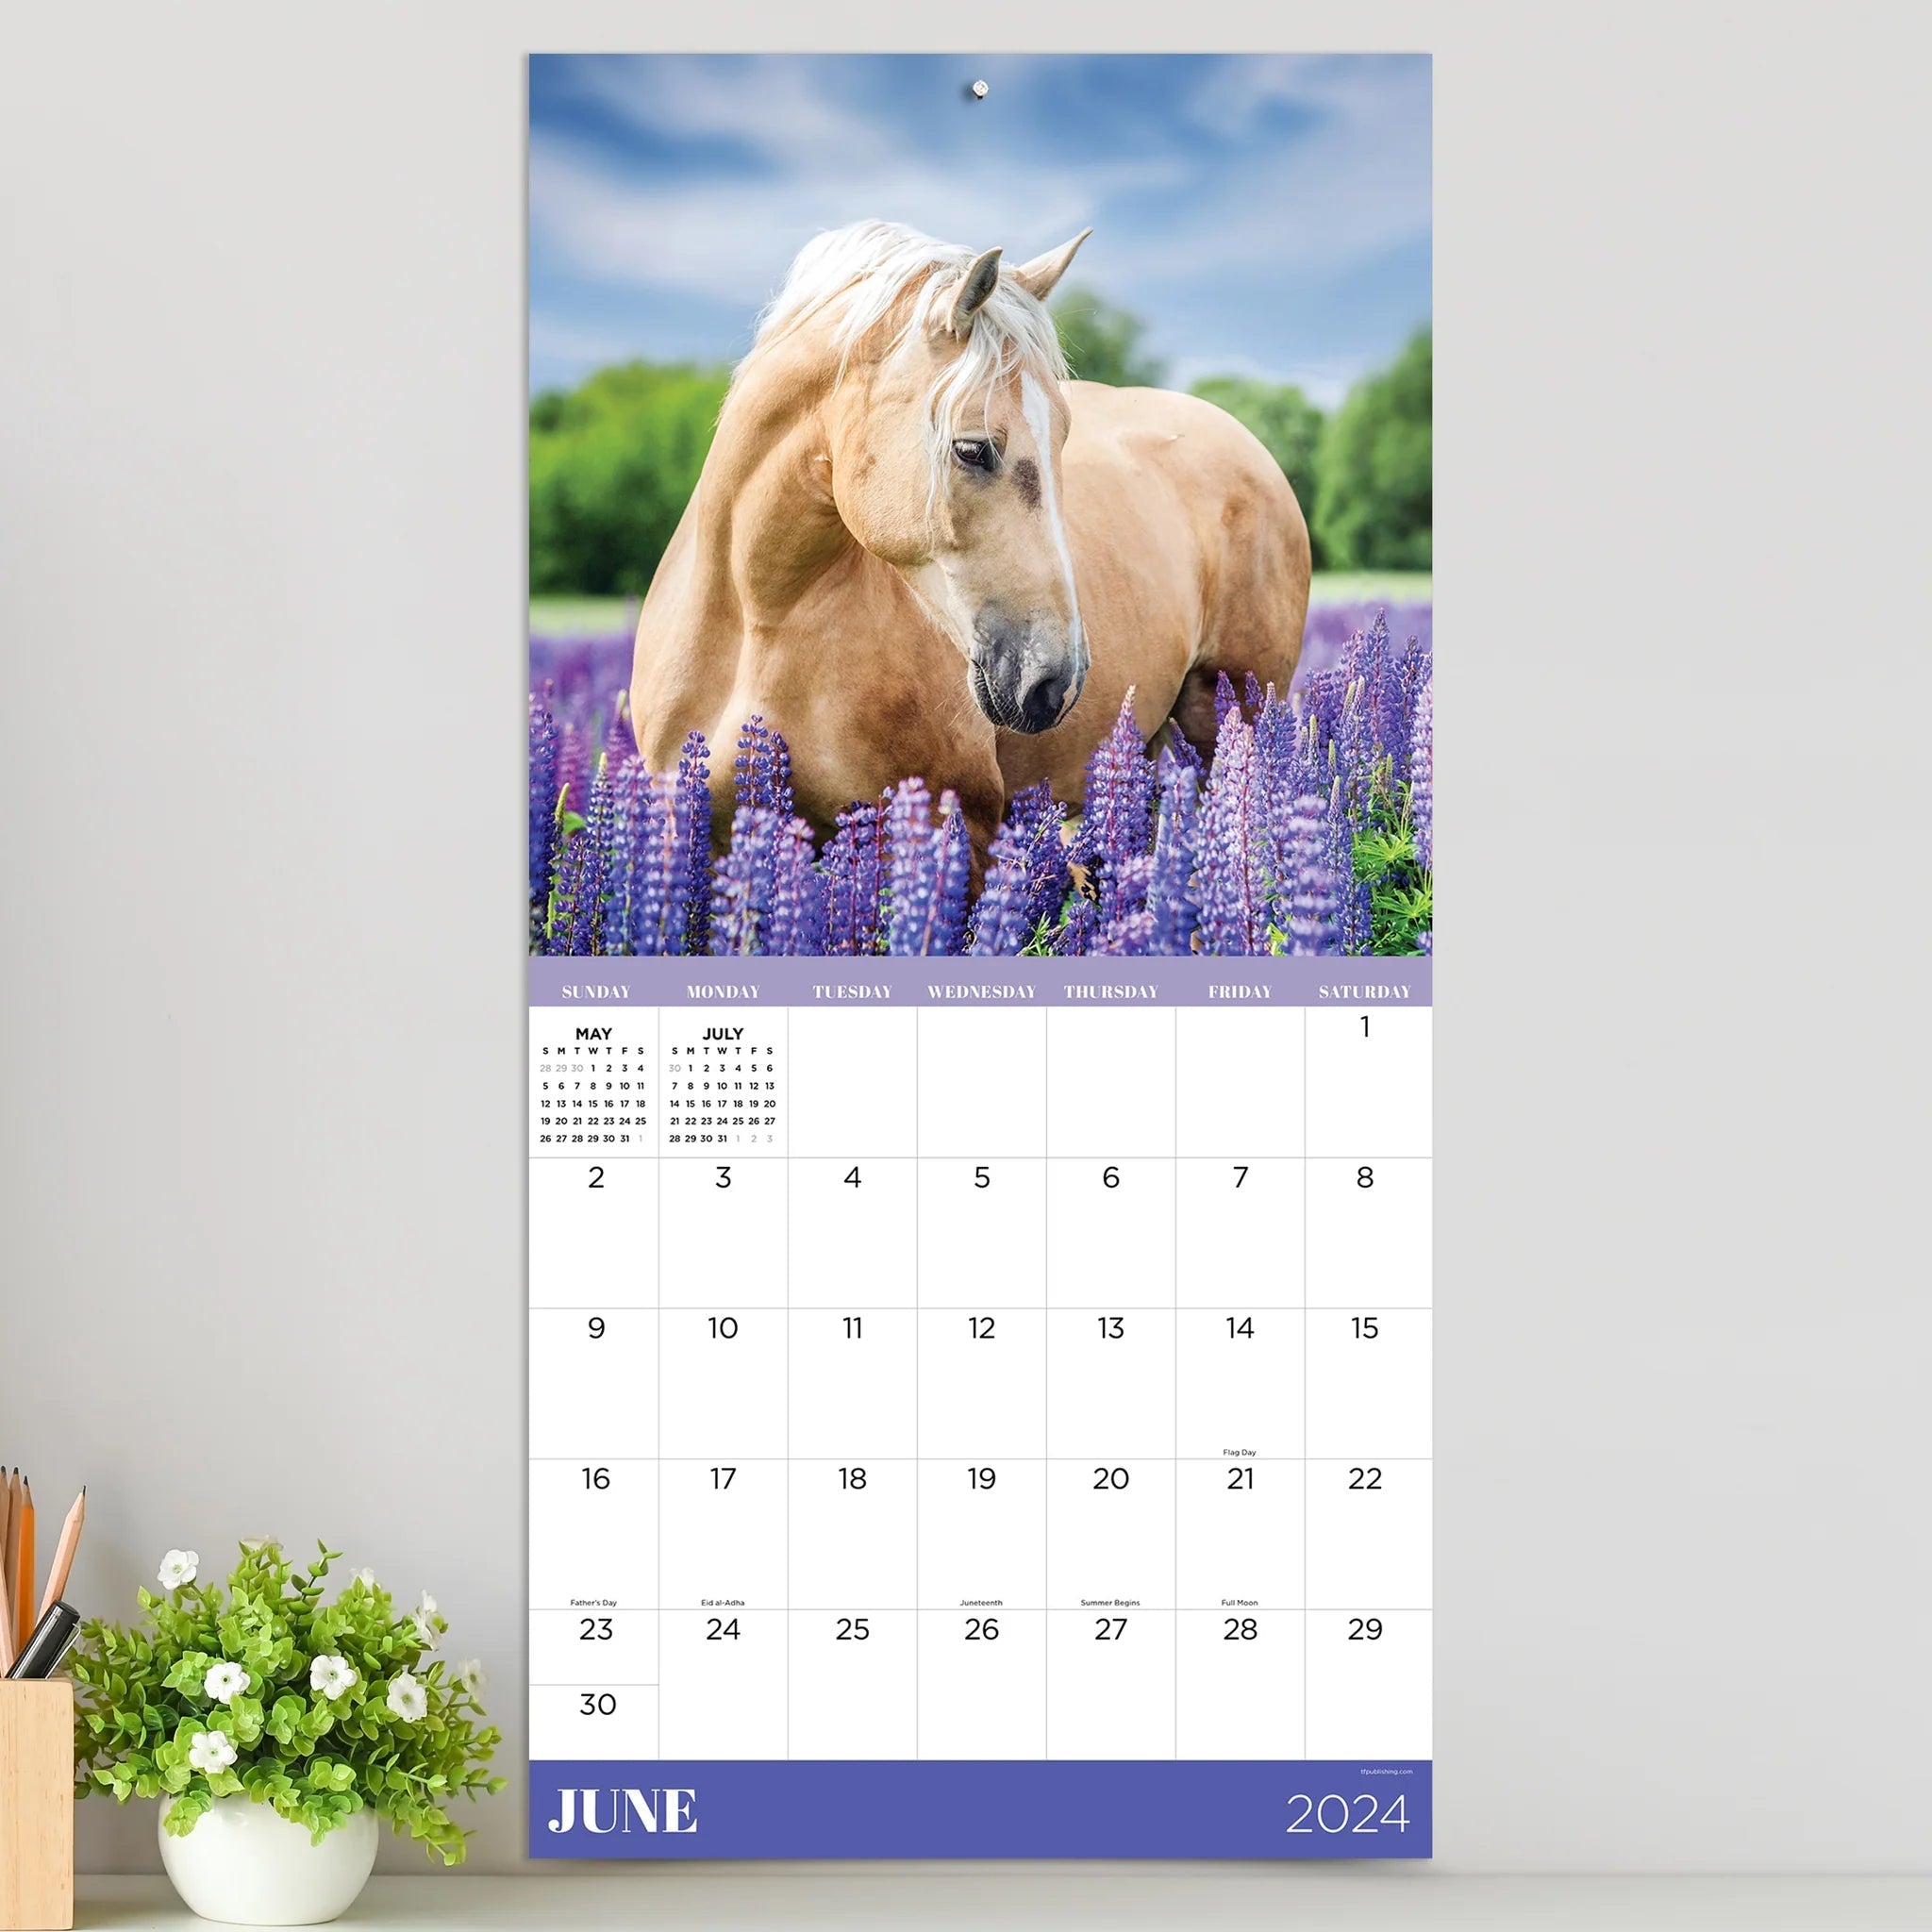 2024 Horses (by TF Publishing) - Square Wall Calendar